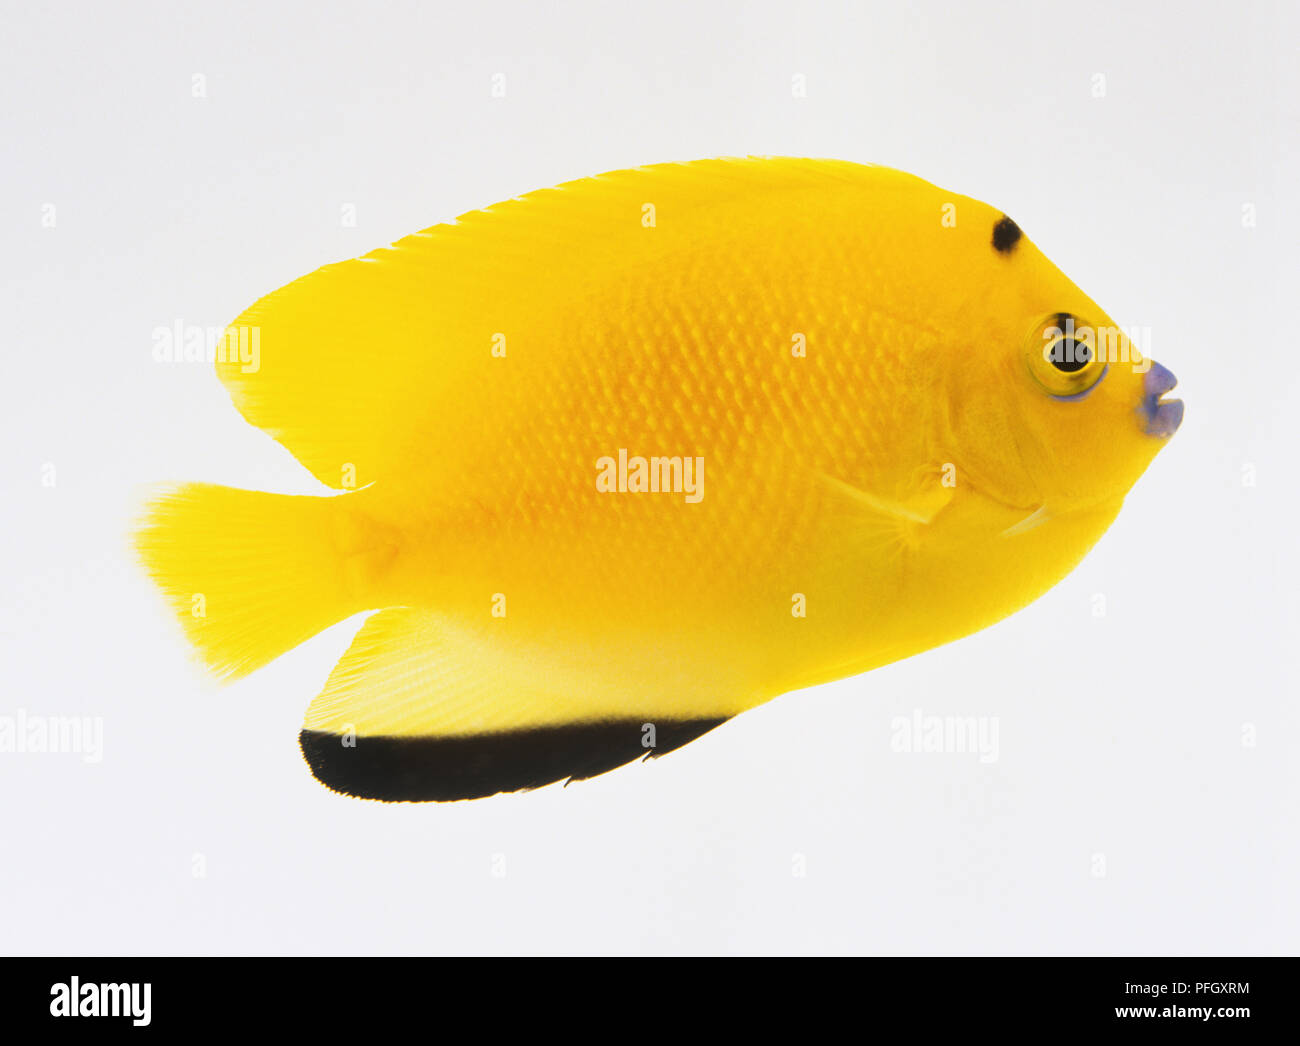 A yellow coloured tropical fish with black markings in bottom fin. Stock Photo